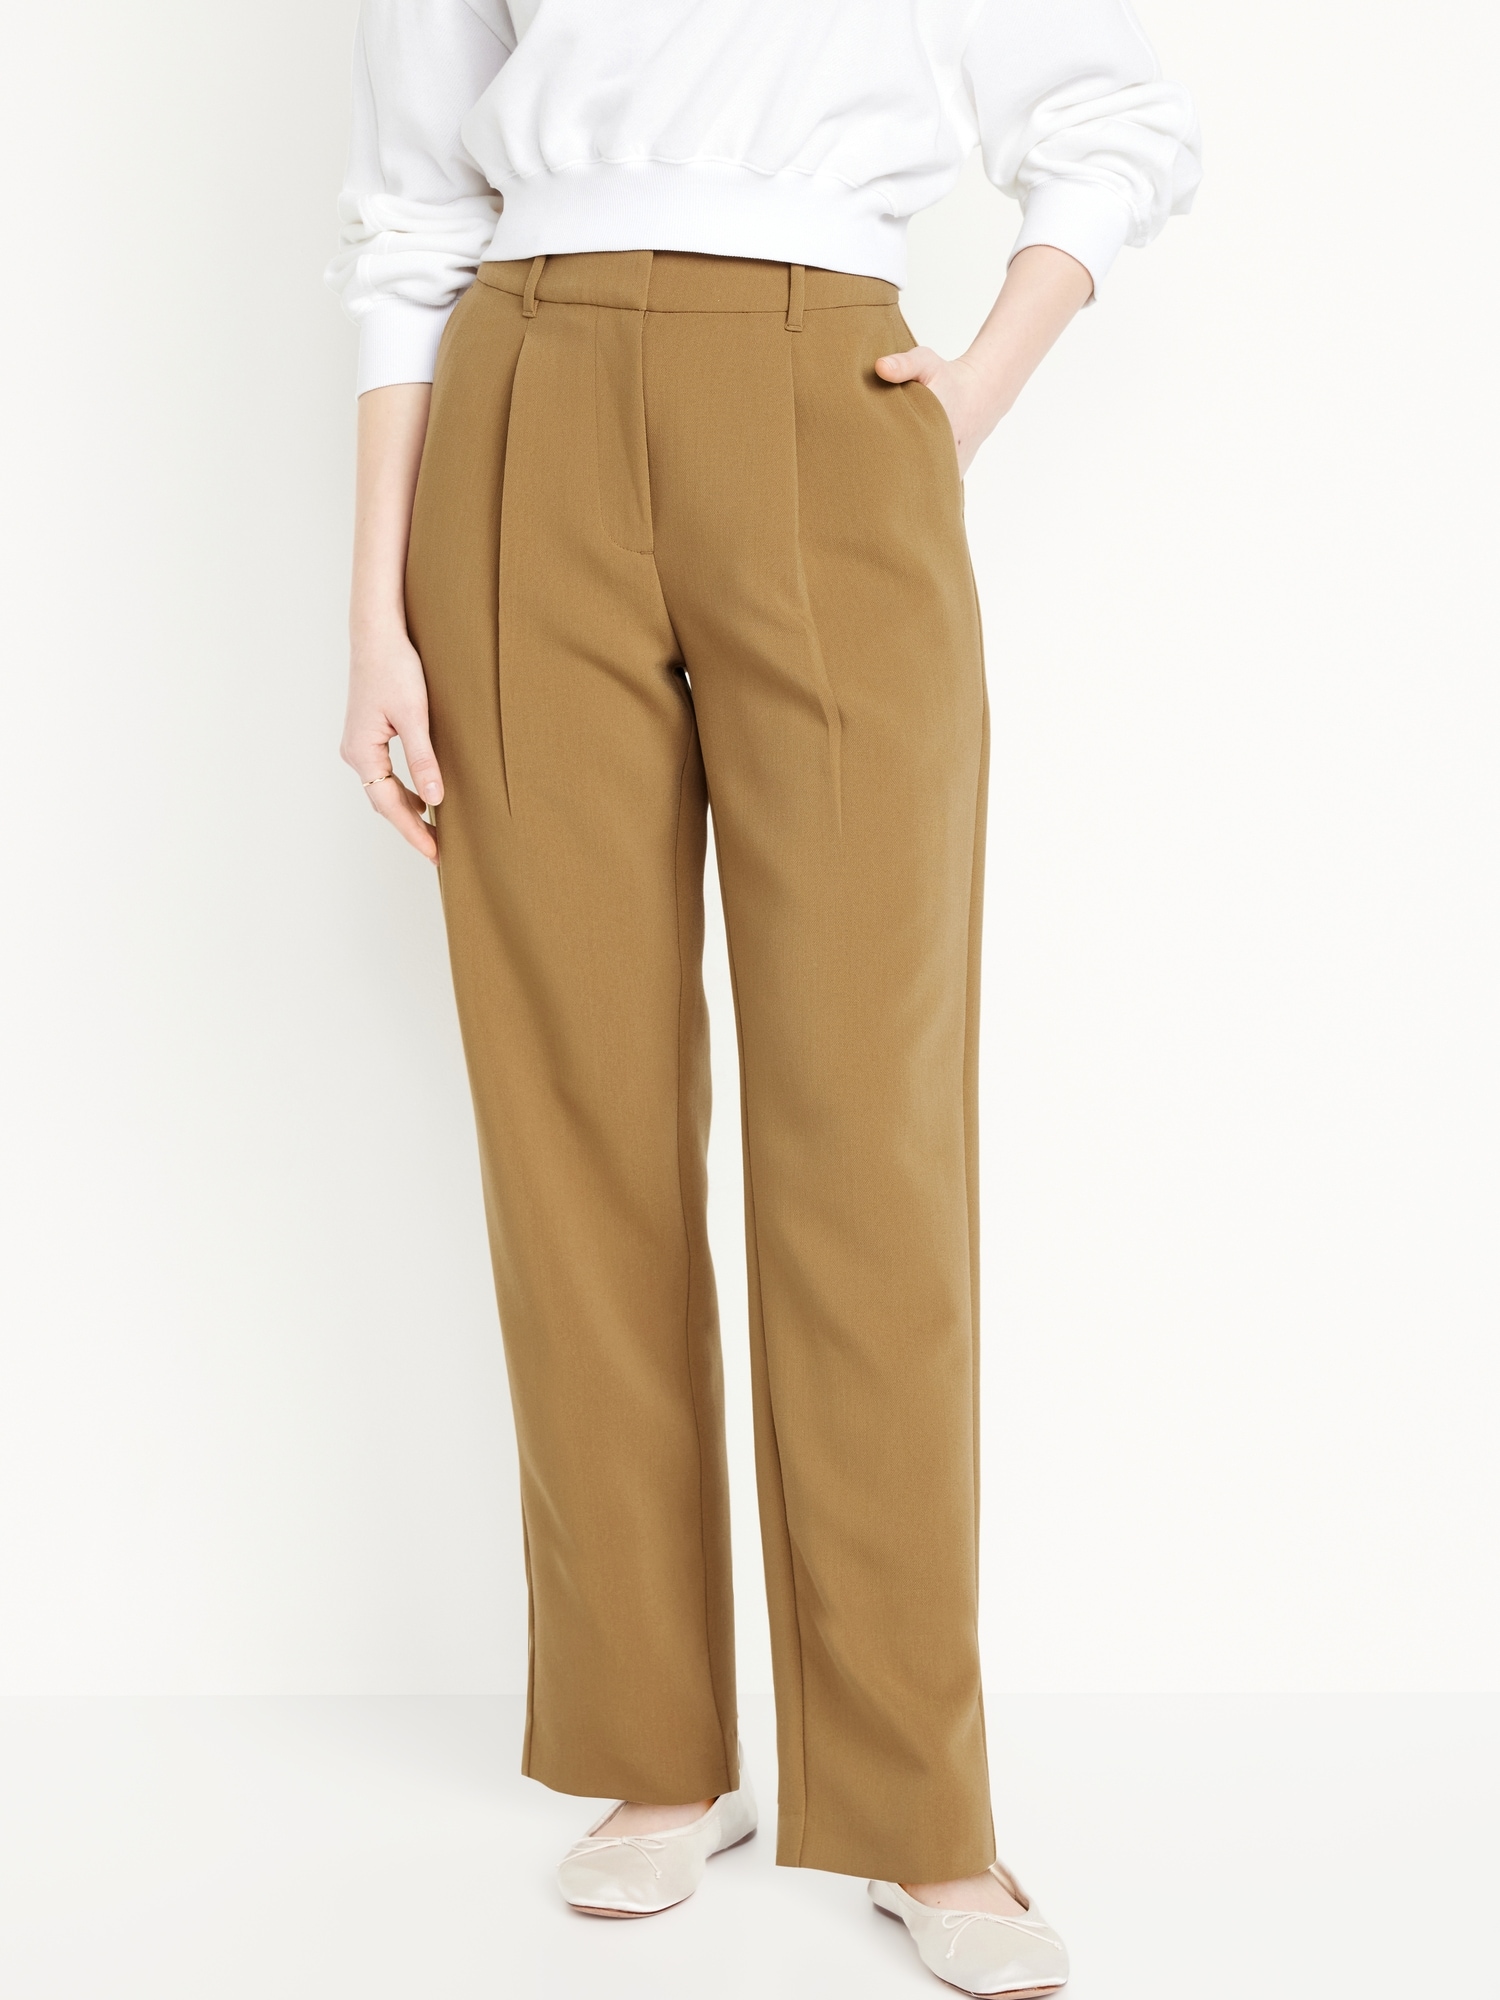 Tapered-tailored Trousers - Women Pants - Lattelier Store